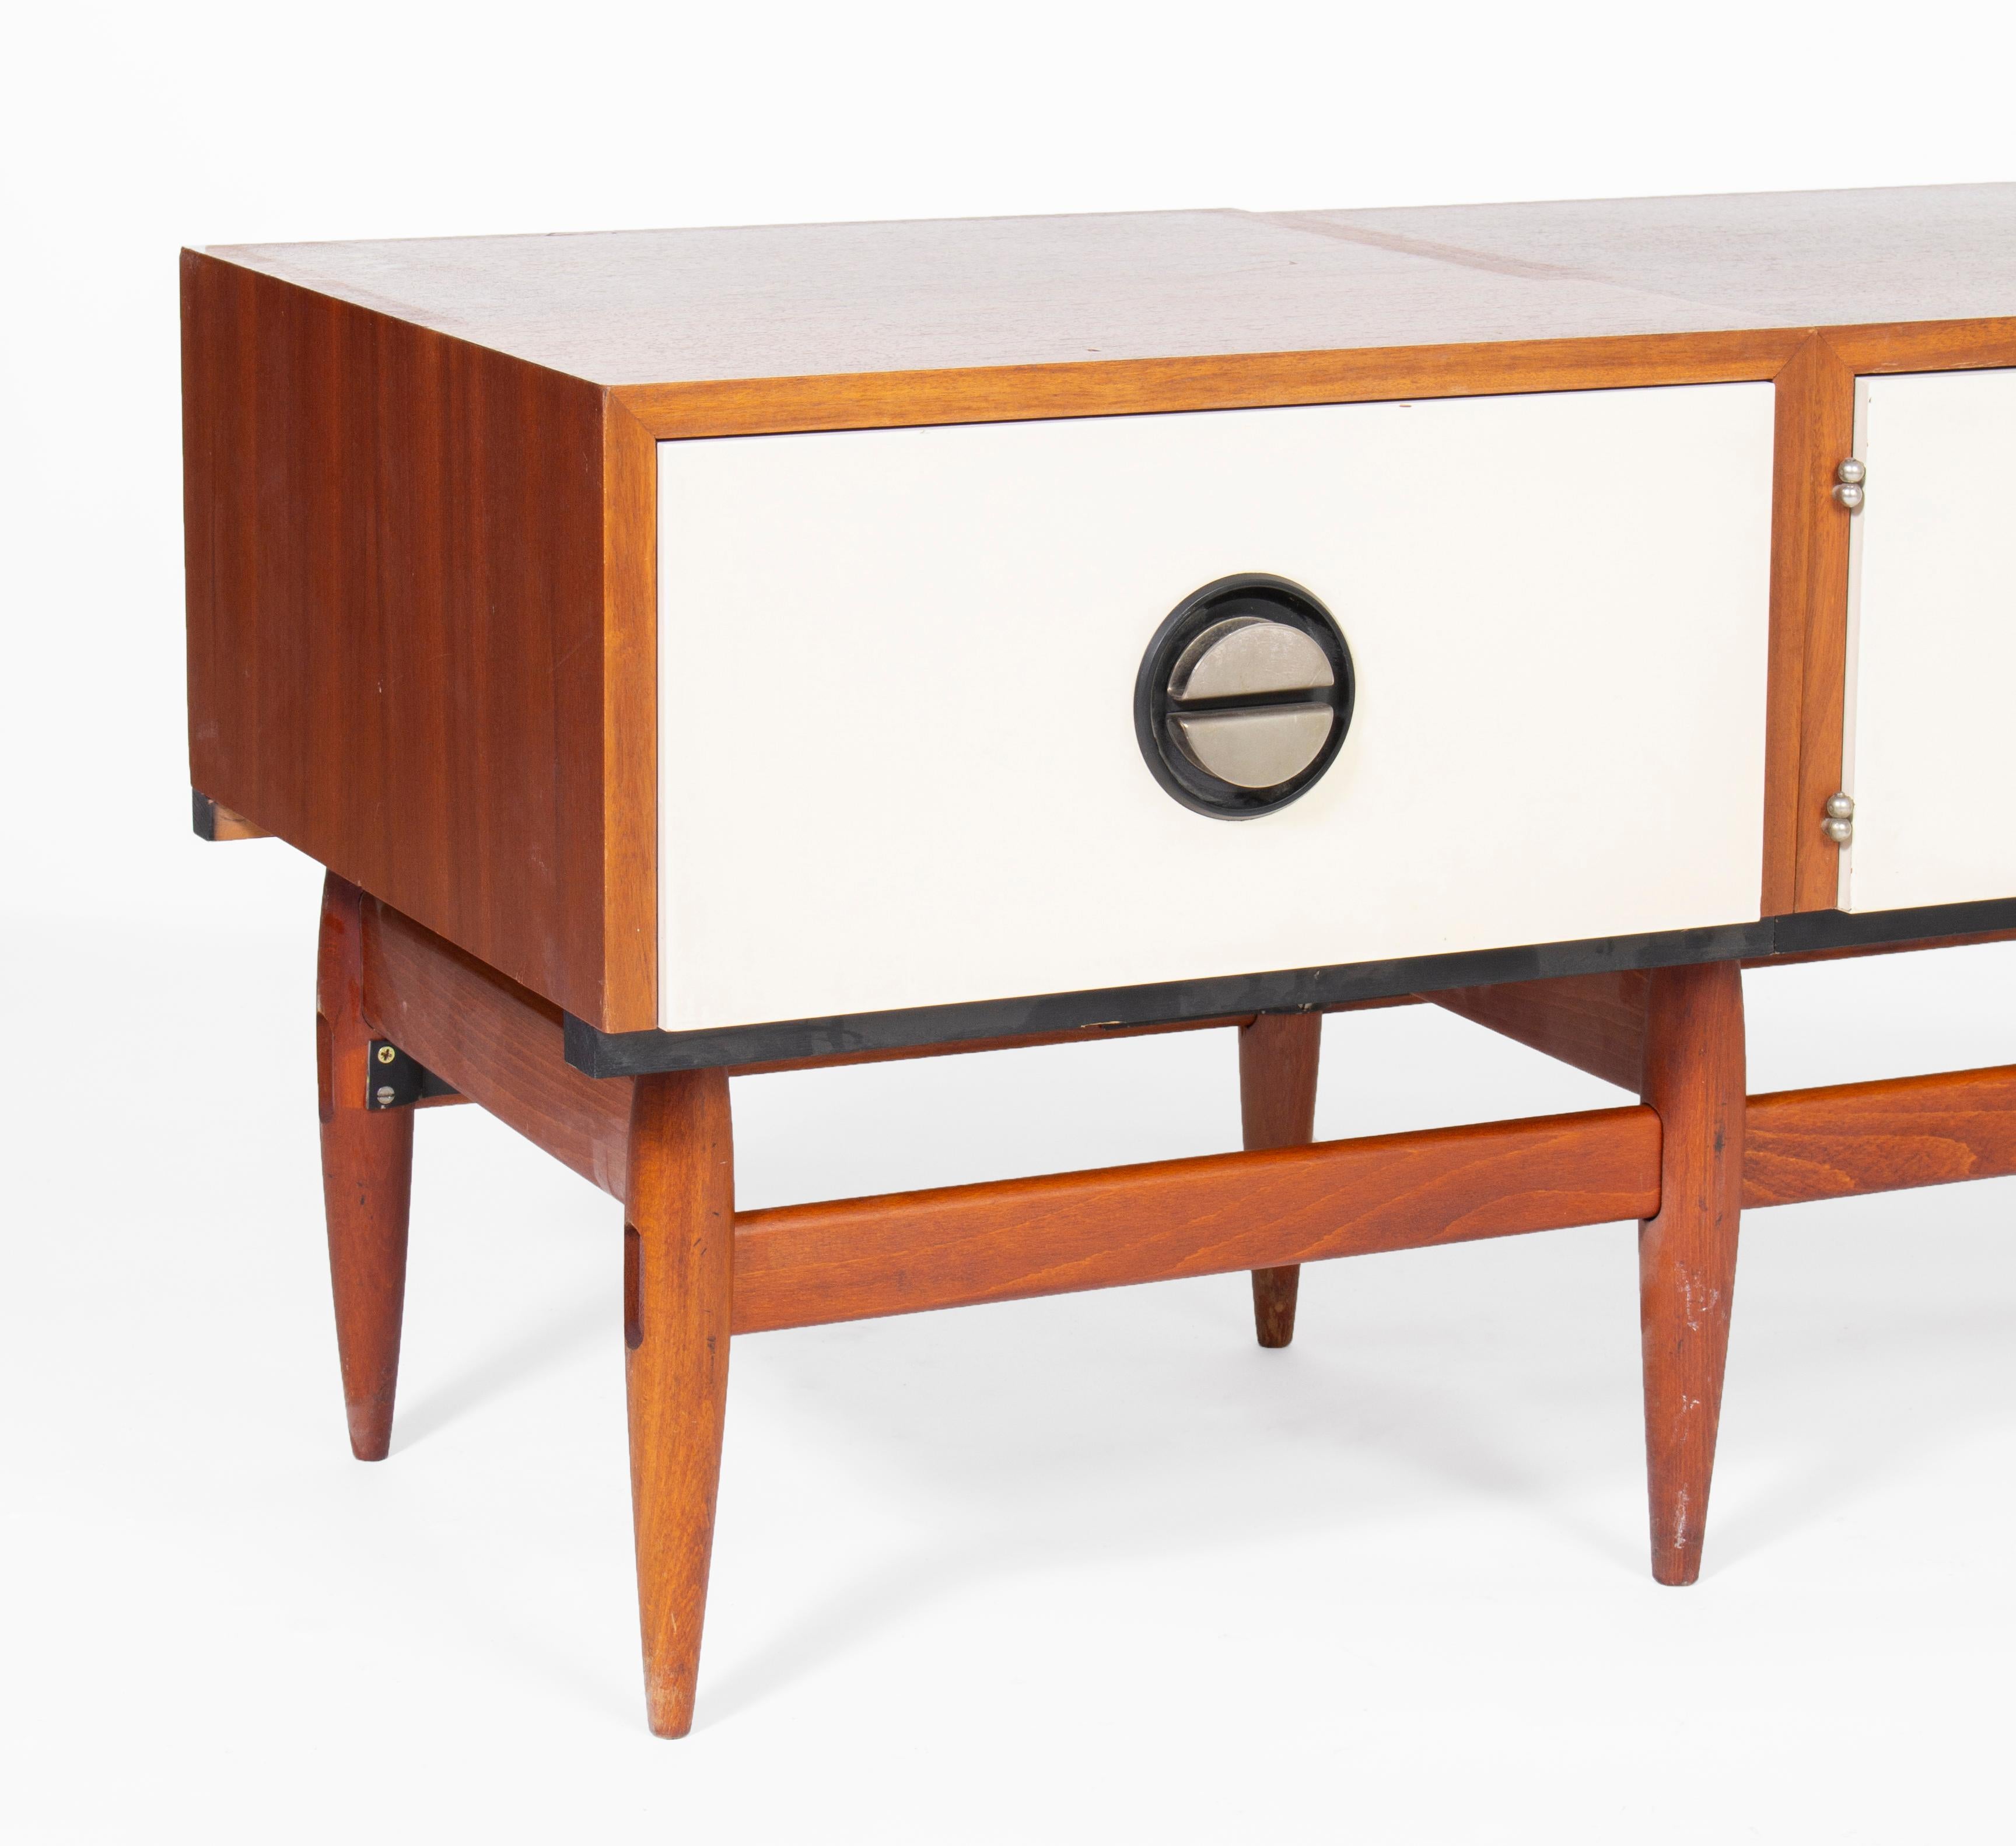 Long walnut media console sideboard with Czeckoslovakian design. Manufactured in the 1970s.